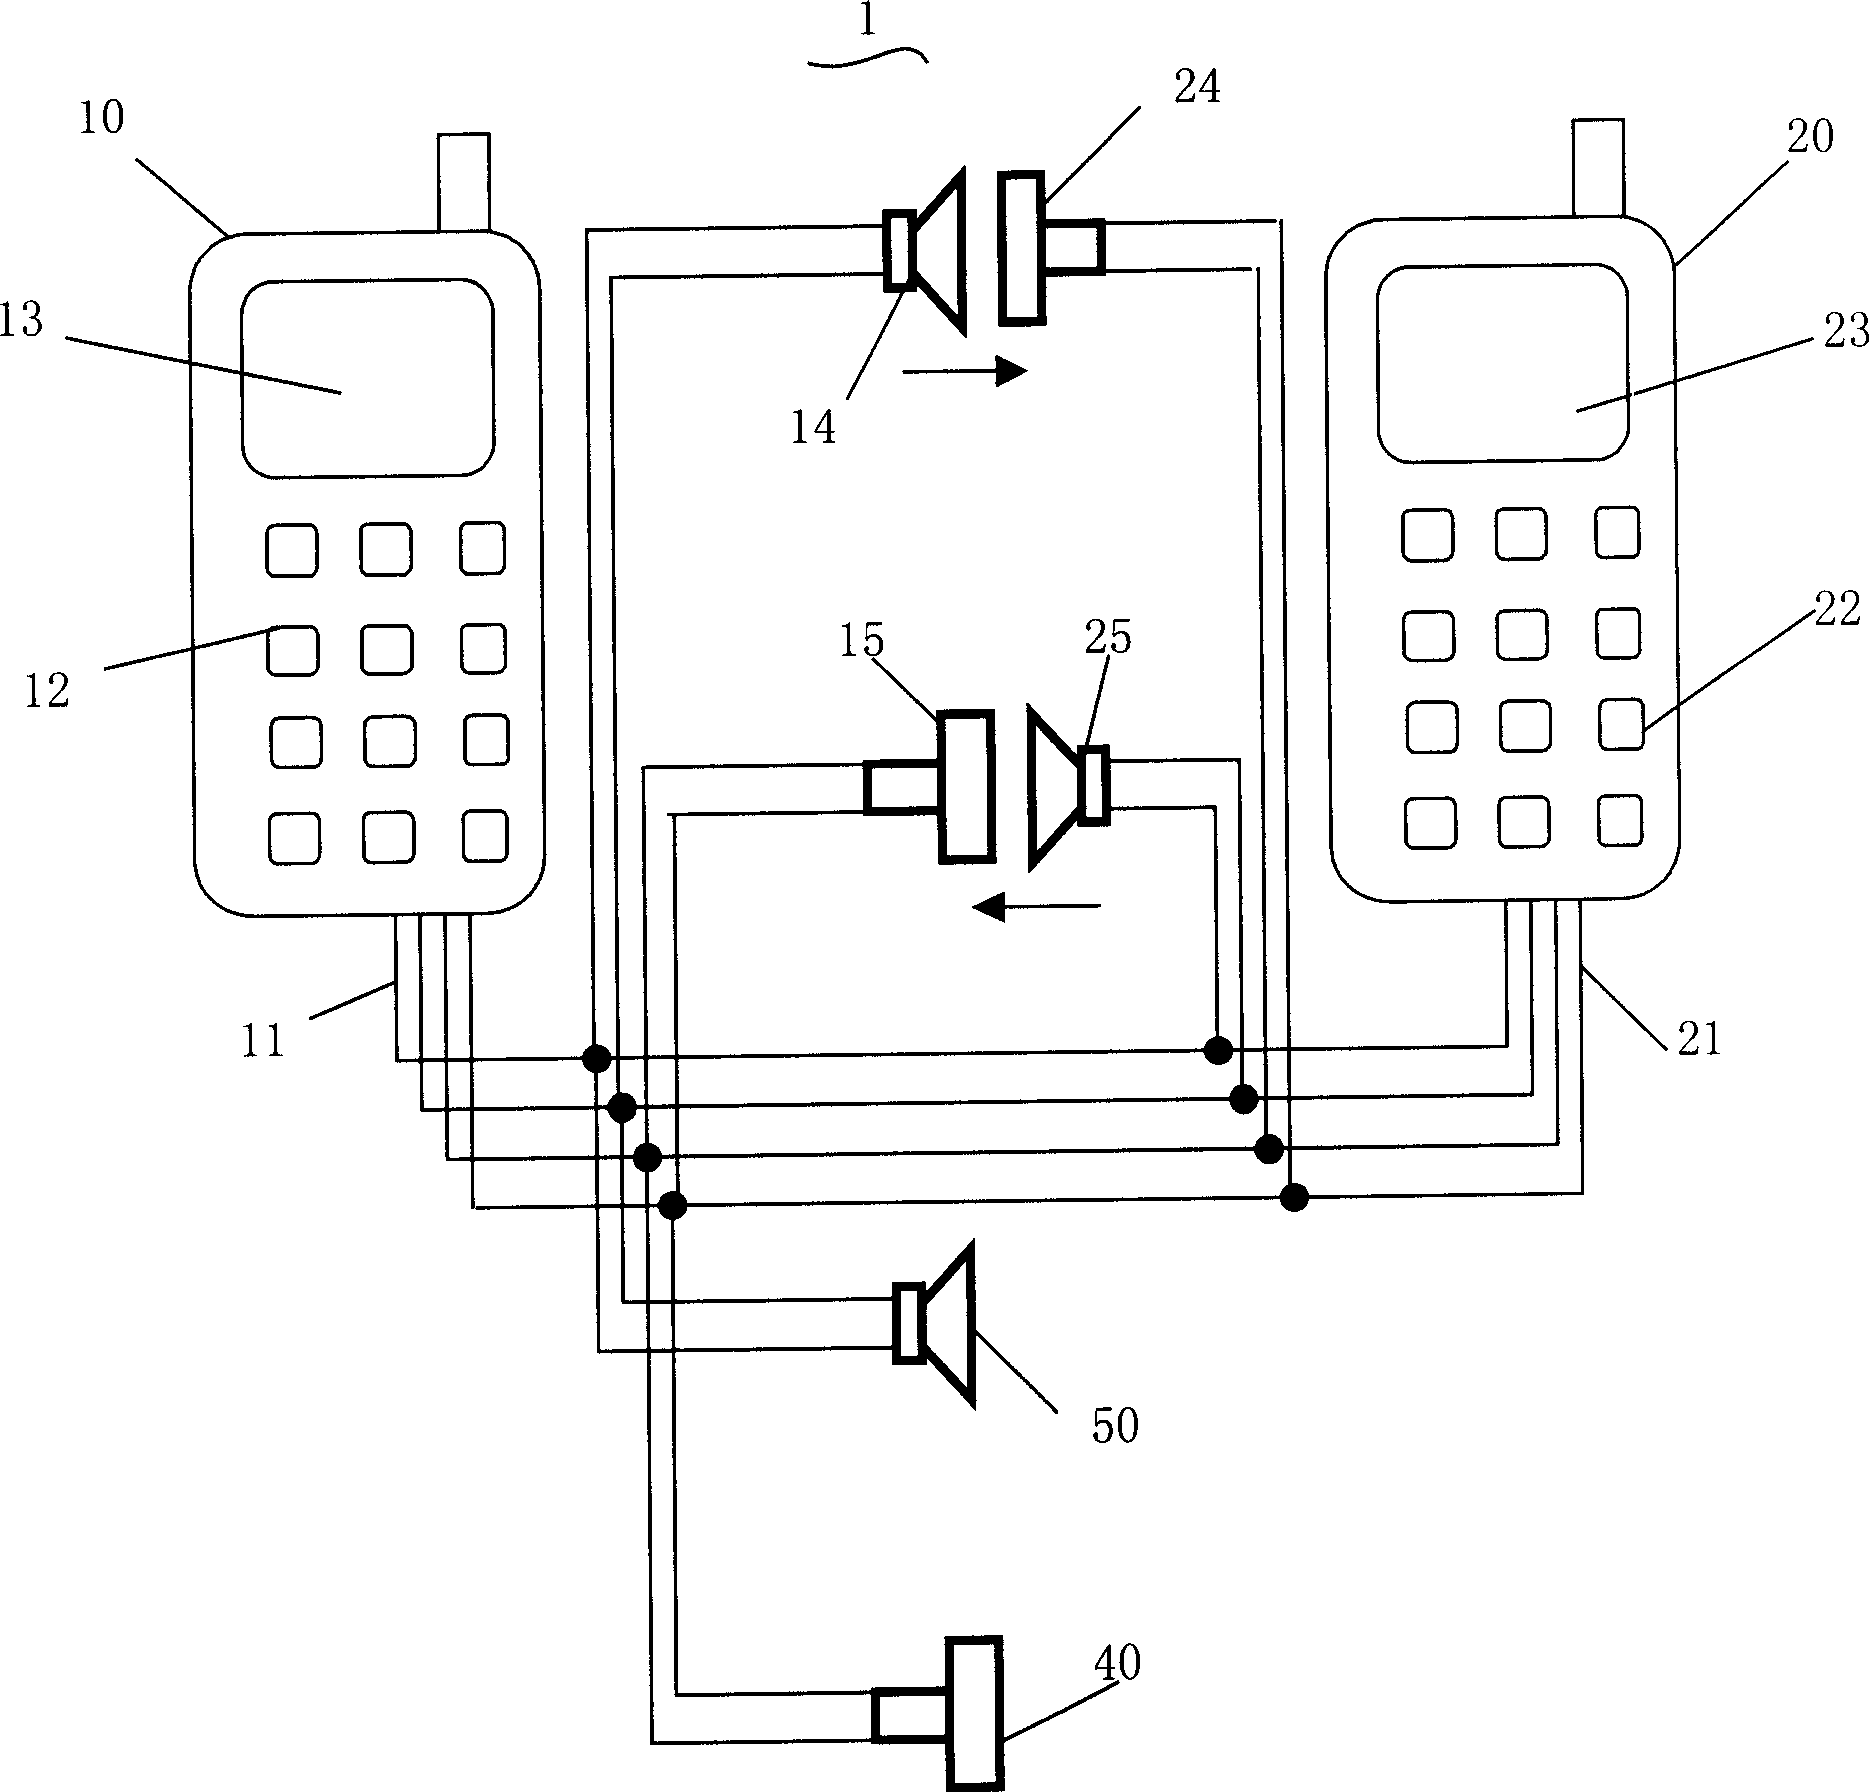 Portable device for communication among multiple parties